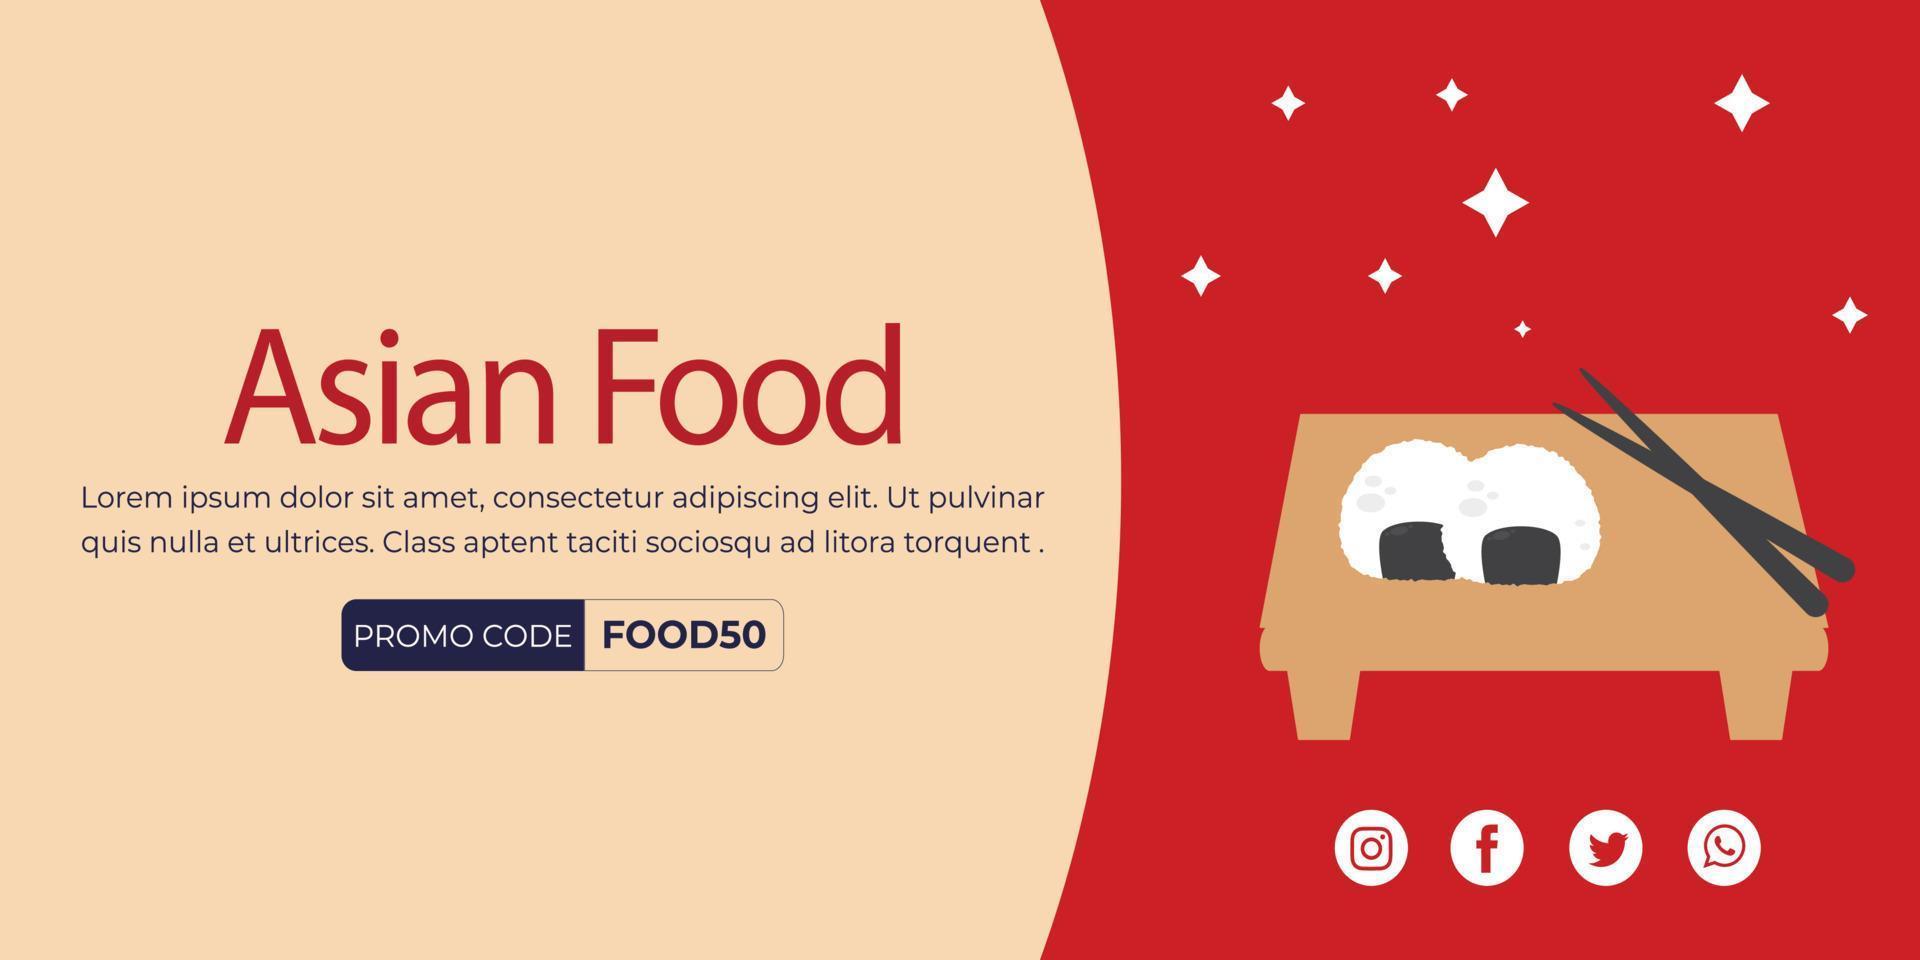 Asian food background vector illustration. Asian food poster